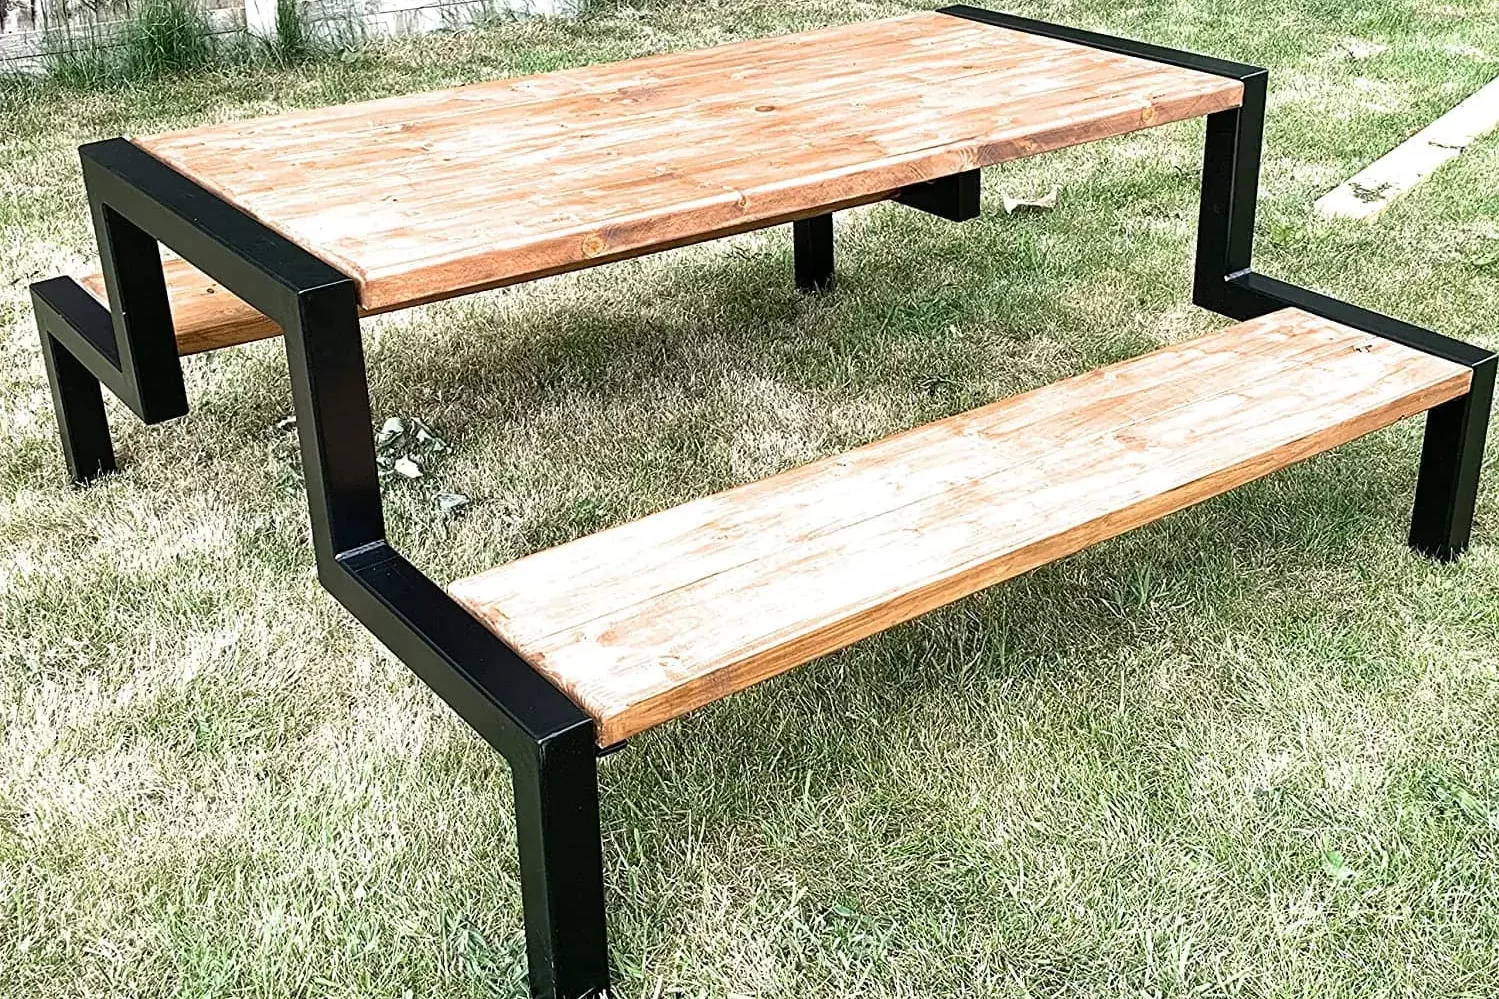 DIY Modern Outdoor Table made from square tubes and wood, version 2